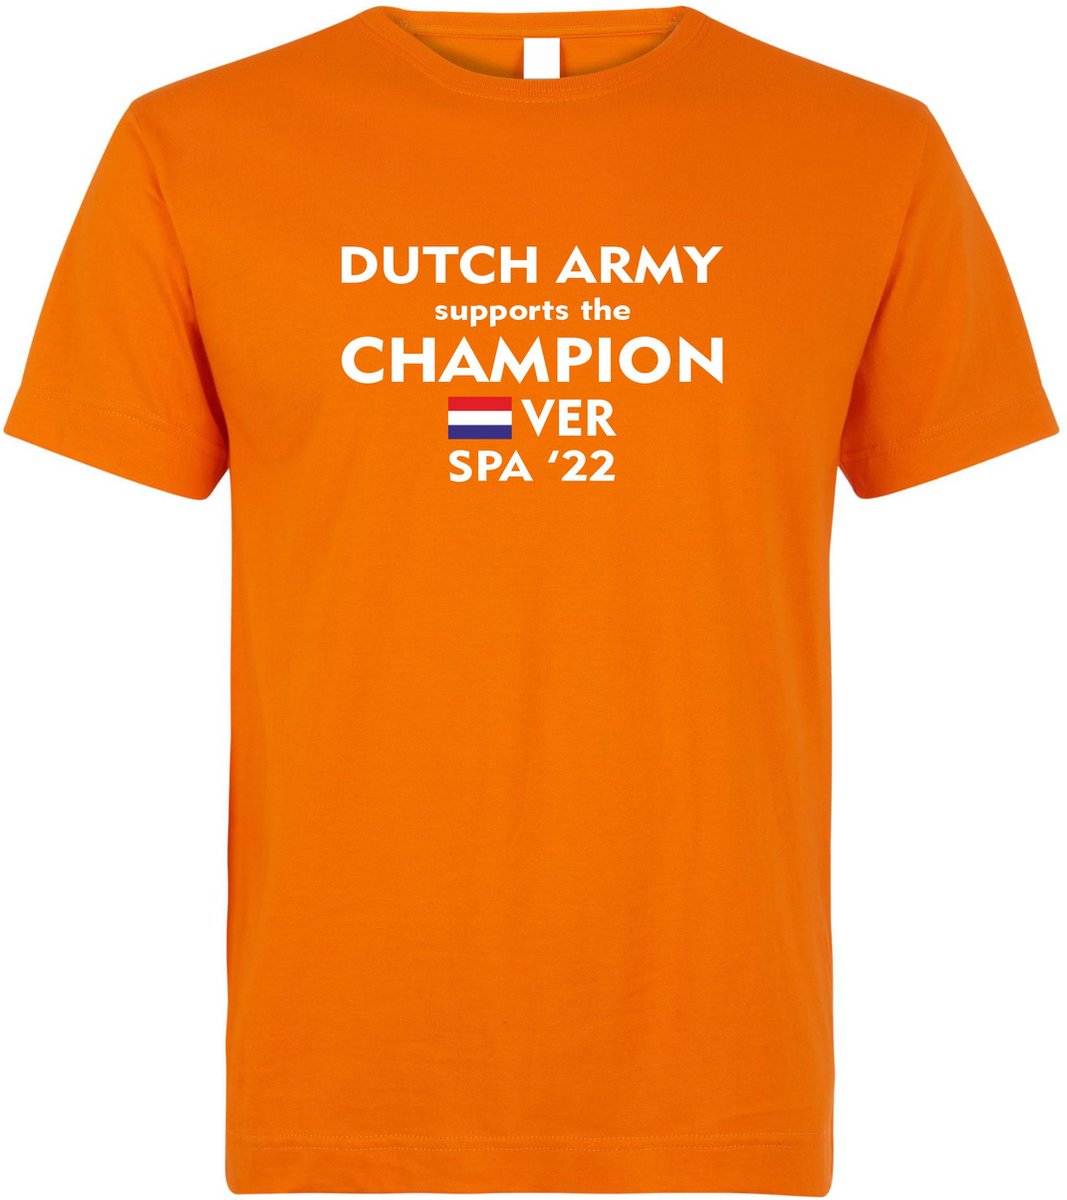 T-shirt kinderen Dutch Army supports the Champion Spa 22 | Max Verstappen / Red Bull Racing / Formule 1 fan | Grand Prix Circuit Spa-Francorchamps | kleding shirt | Oranje | maat 68